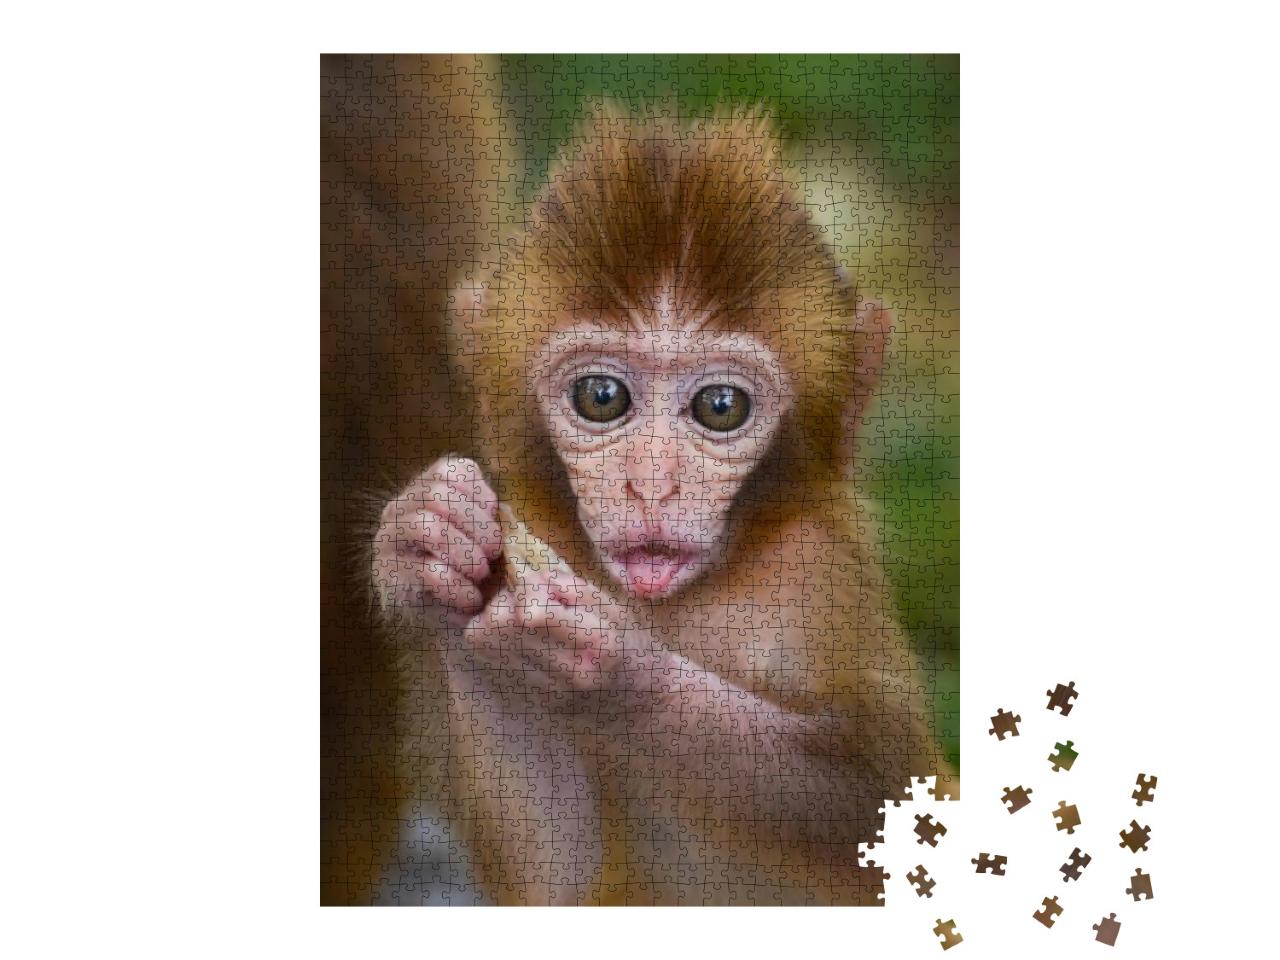 Cute Baby Monkey Eating in a Forest... Jigsaw Puzzle with 1000 pieces